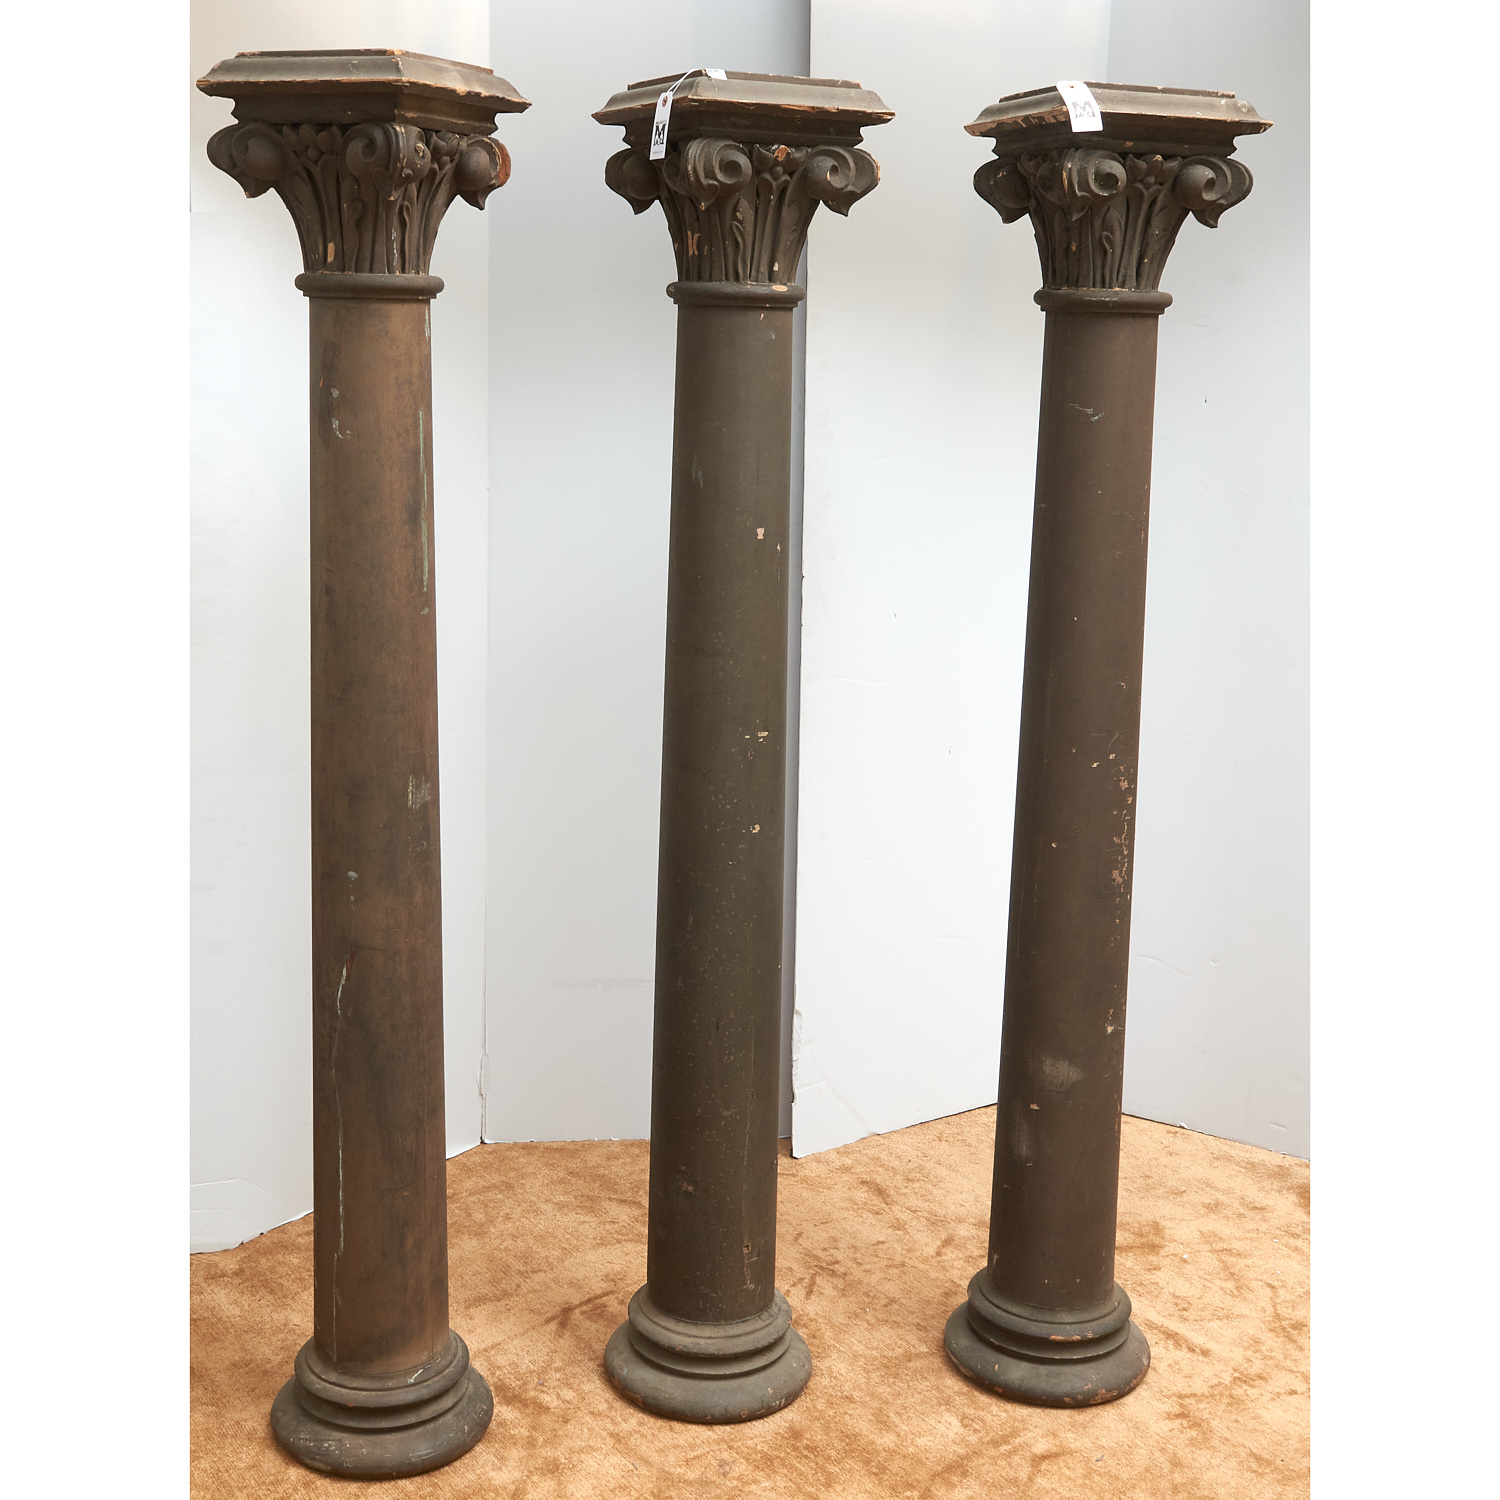  3 CORINTHIAN CARVED WOOD ARCHITECTURAL 3621e0